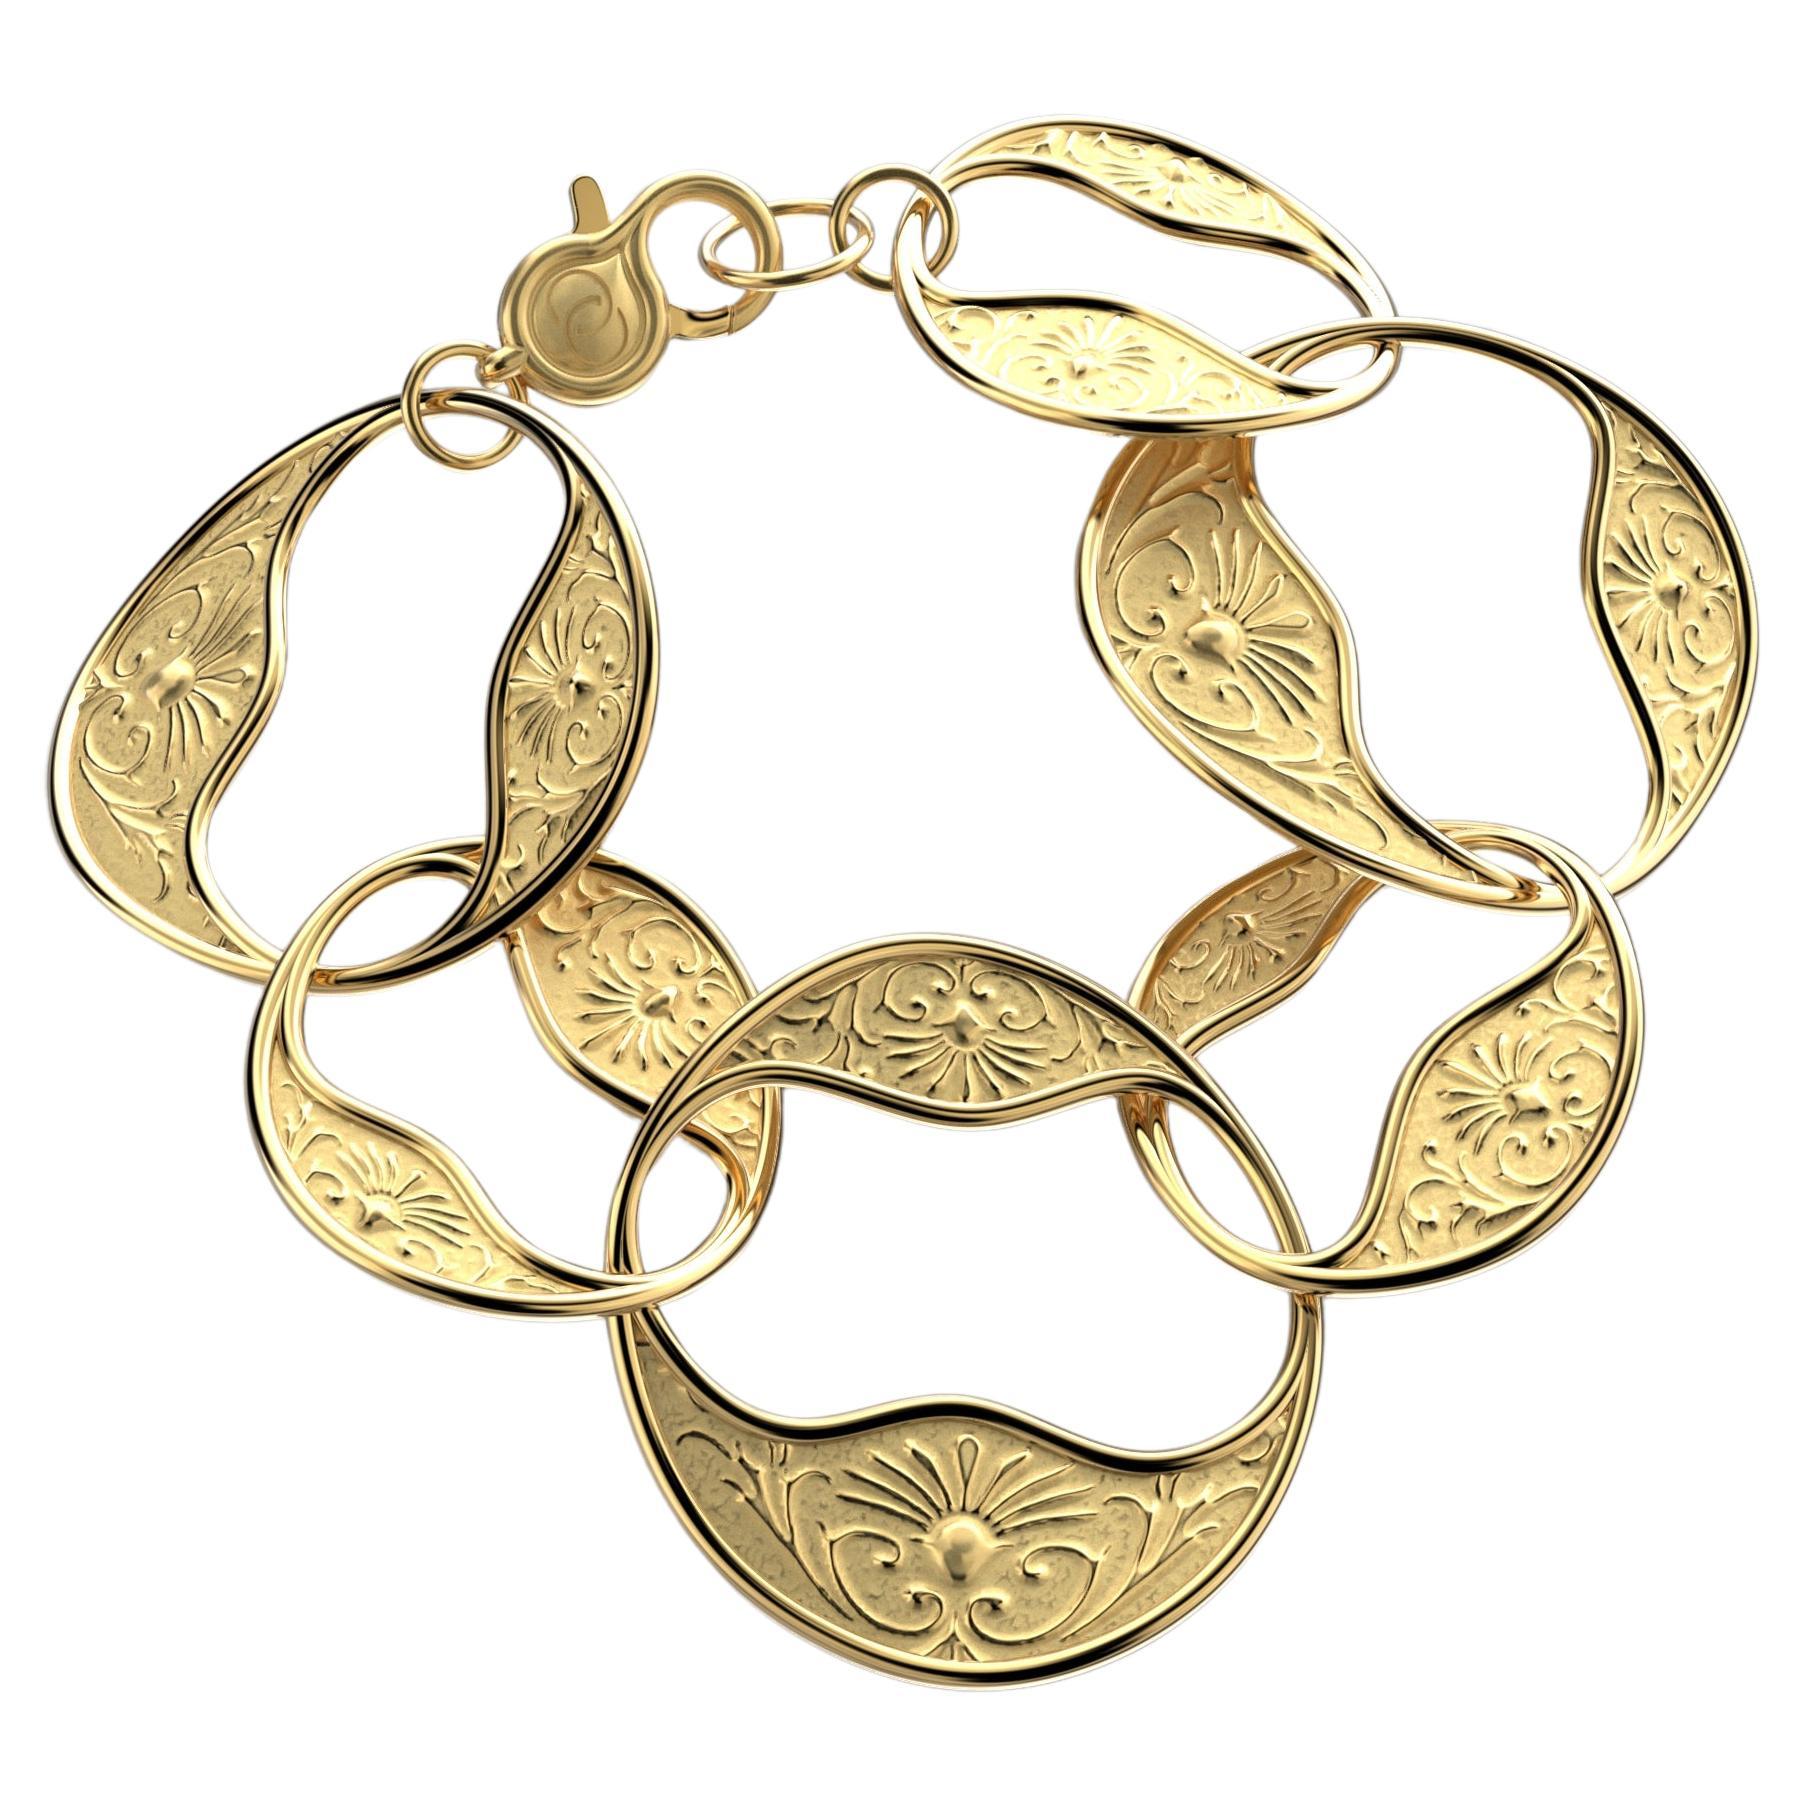 18k Gold Link Bracelet in Baroque Style | Made in Italy by Oltremare Gioielli For Sale